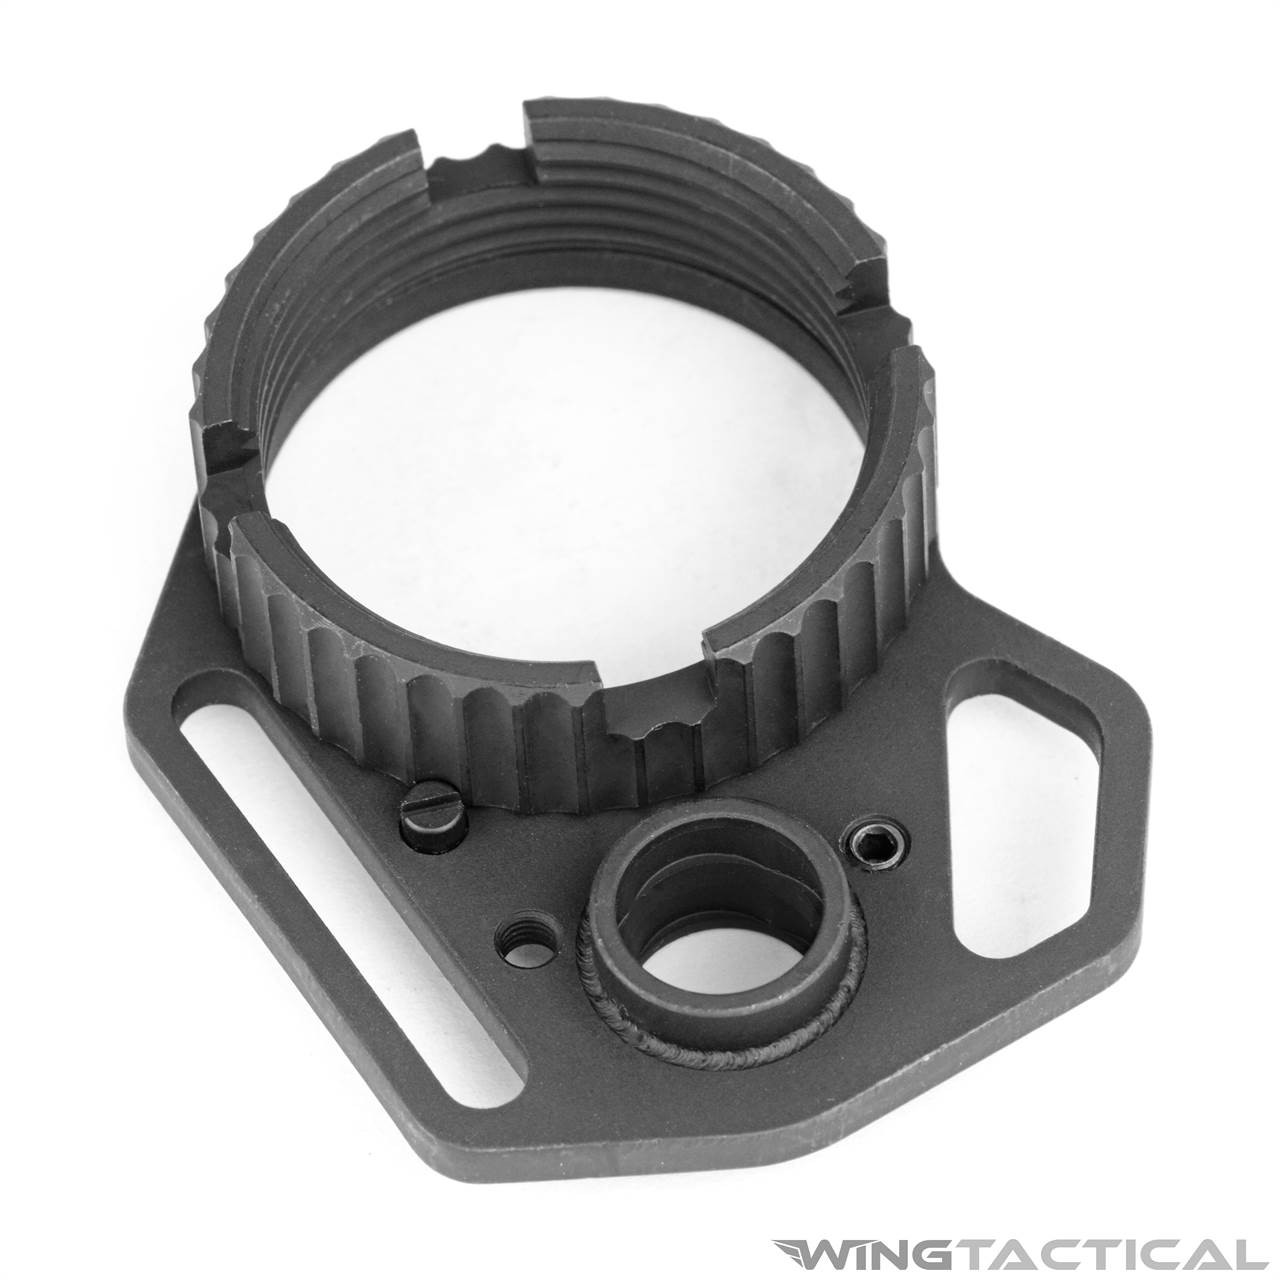 Strike Industries Multi-Function End Plate and Anti-Rotation Castle Nut